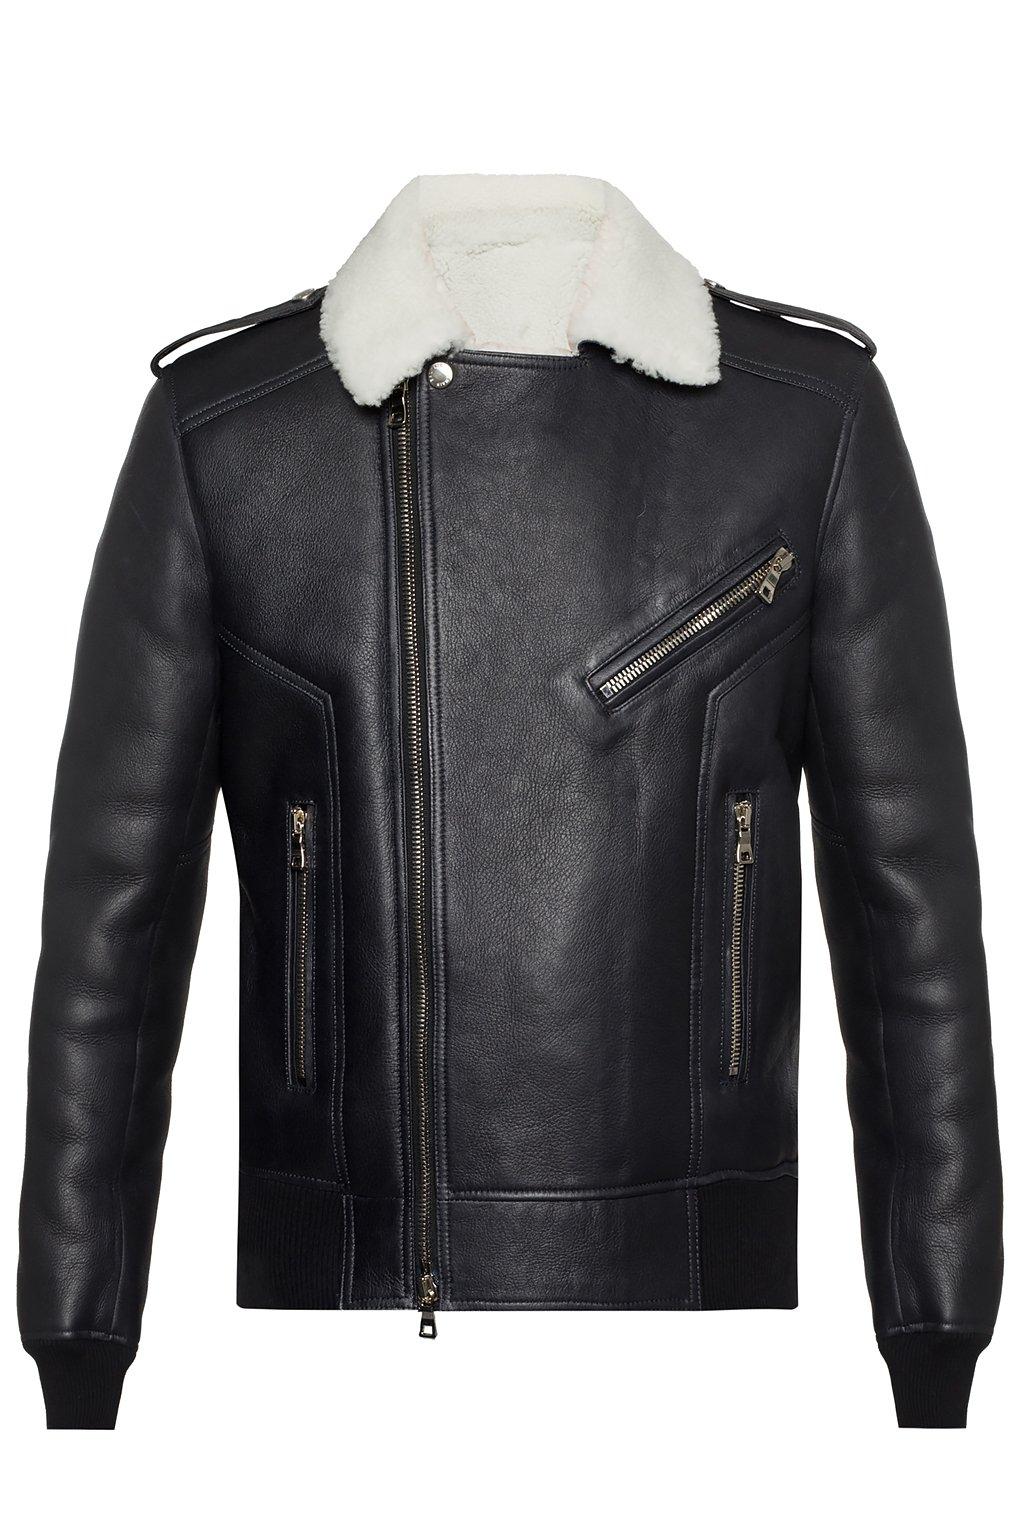 Balmain Leather Jacket With Fur Trim in Black for Men - Lyst